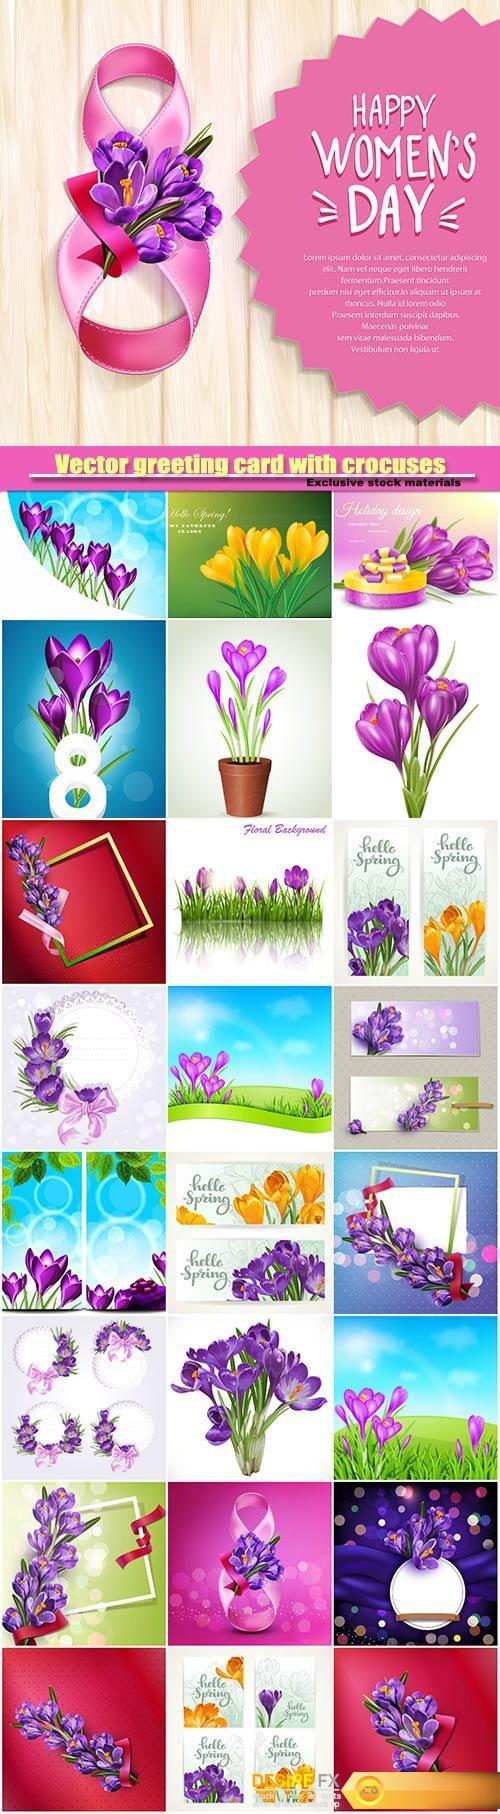 Vector greeting card with crocuses, frame with spring flowers